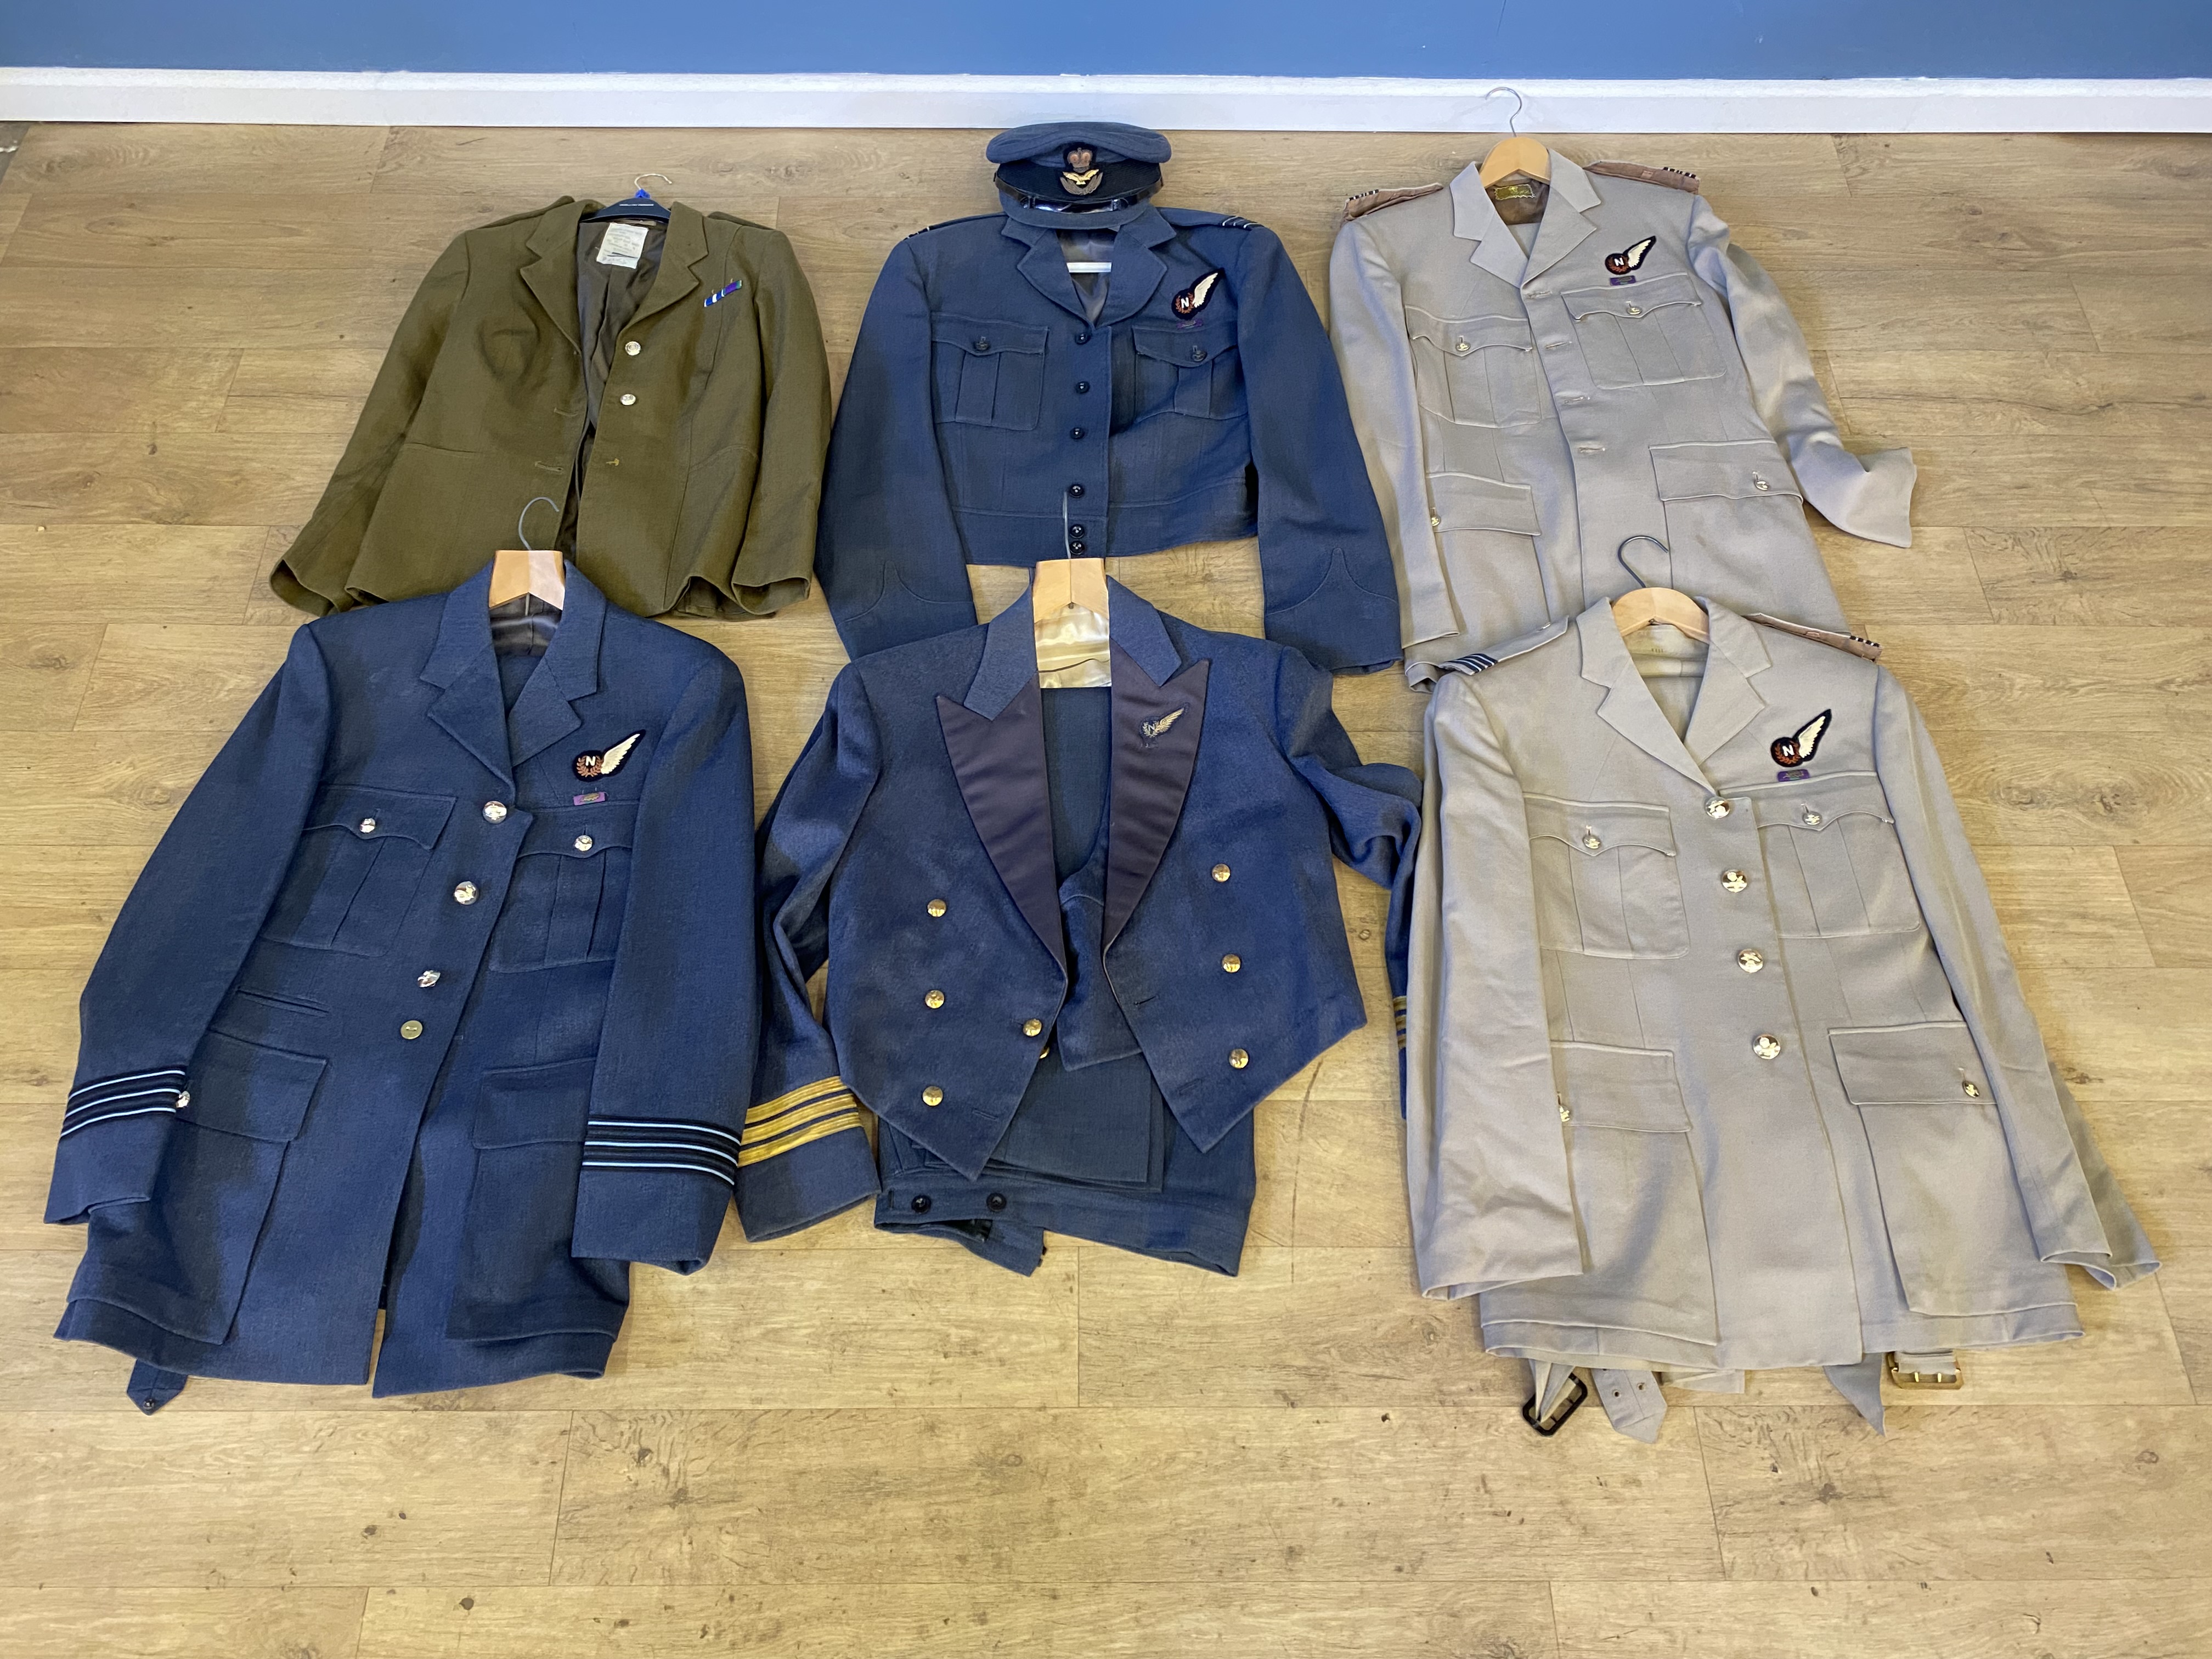 Collection of RAF and military uniforms, including one Cap